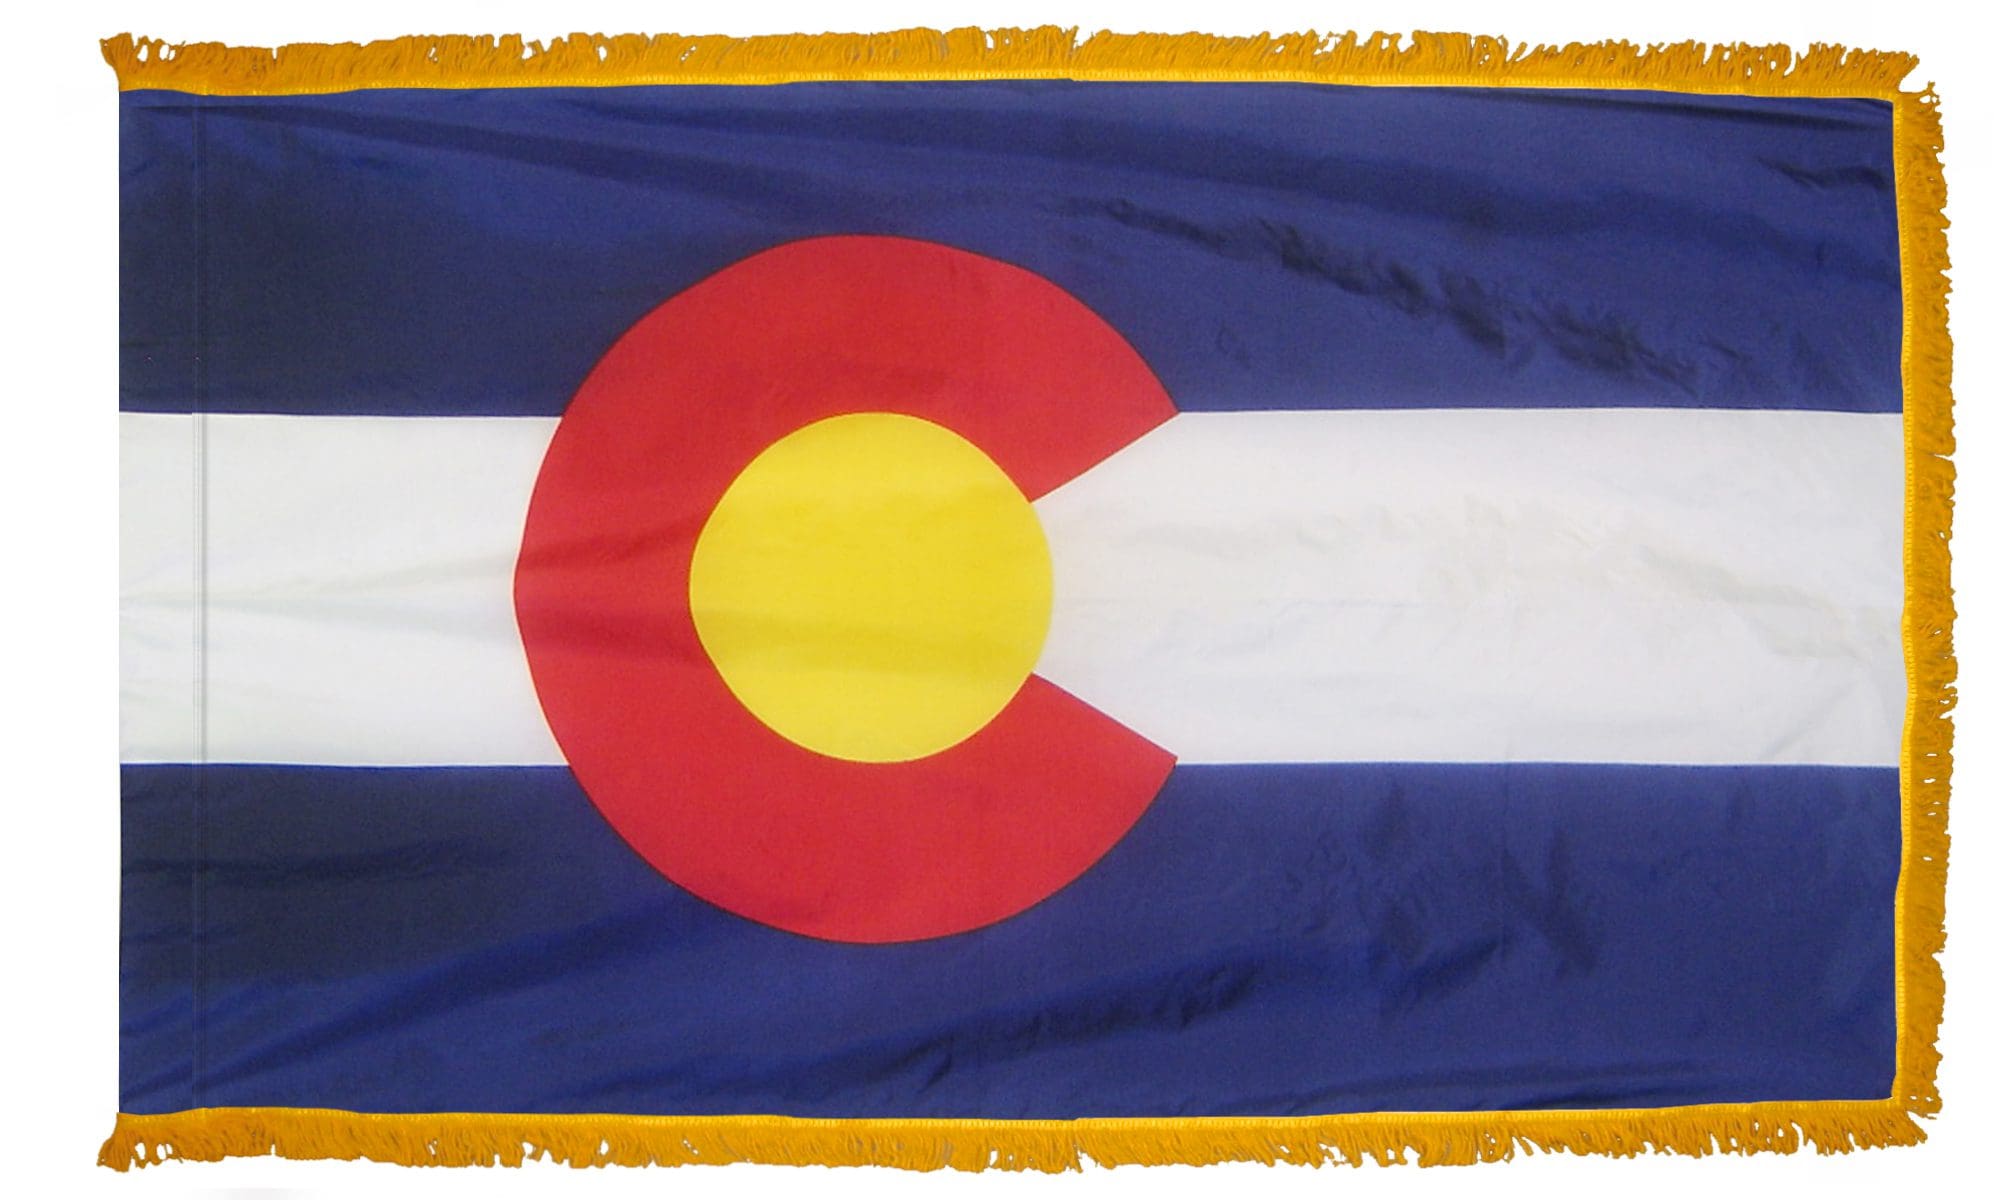 Colorado State Flag 3x5 or 4x6 ft. (fringed)